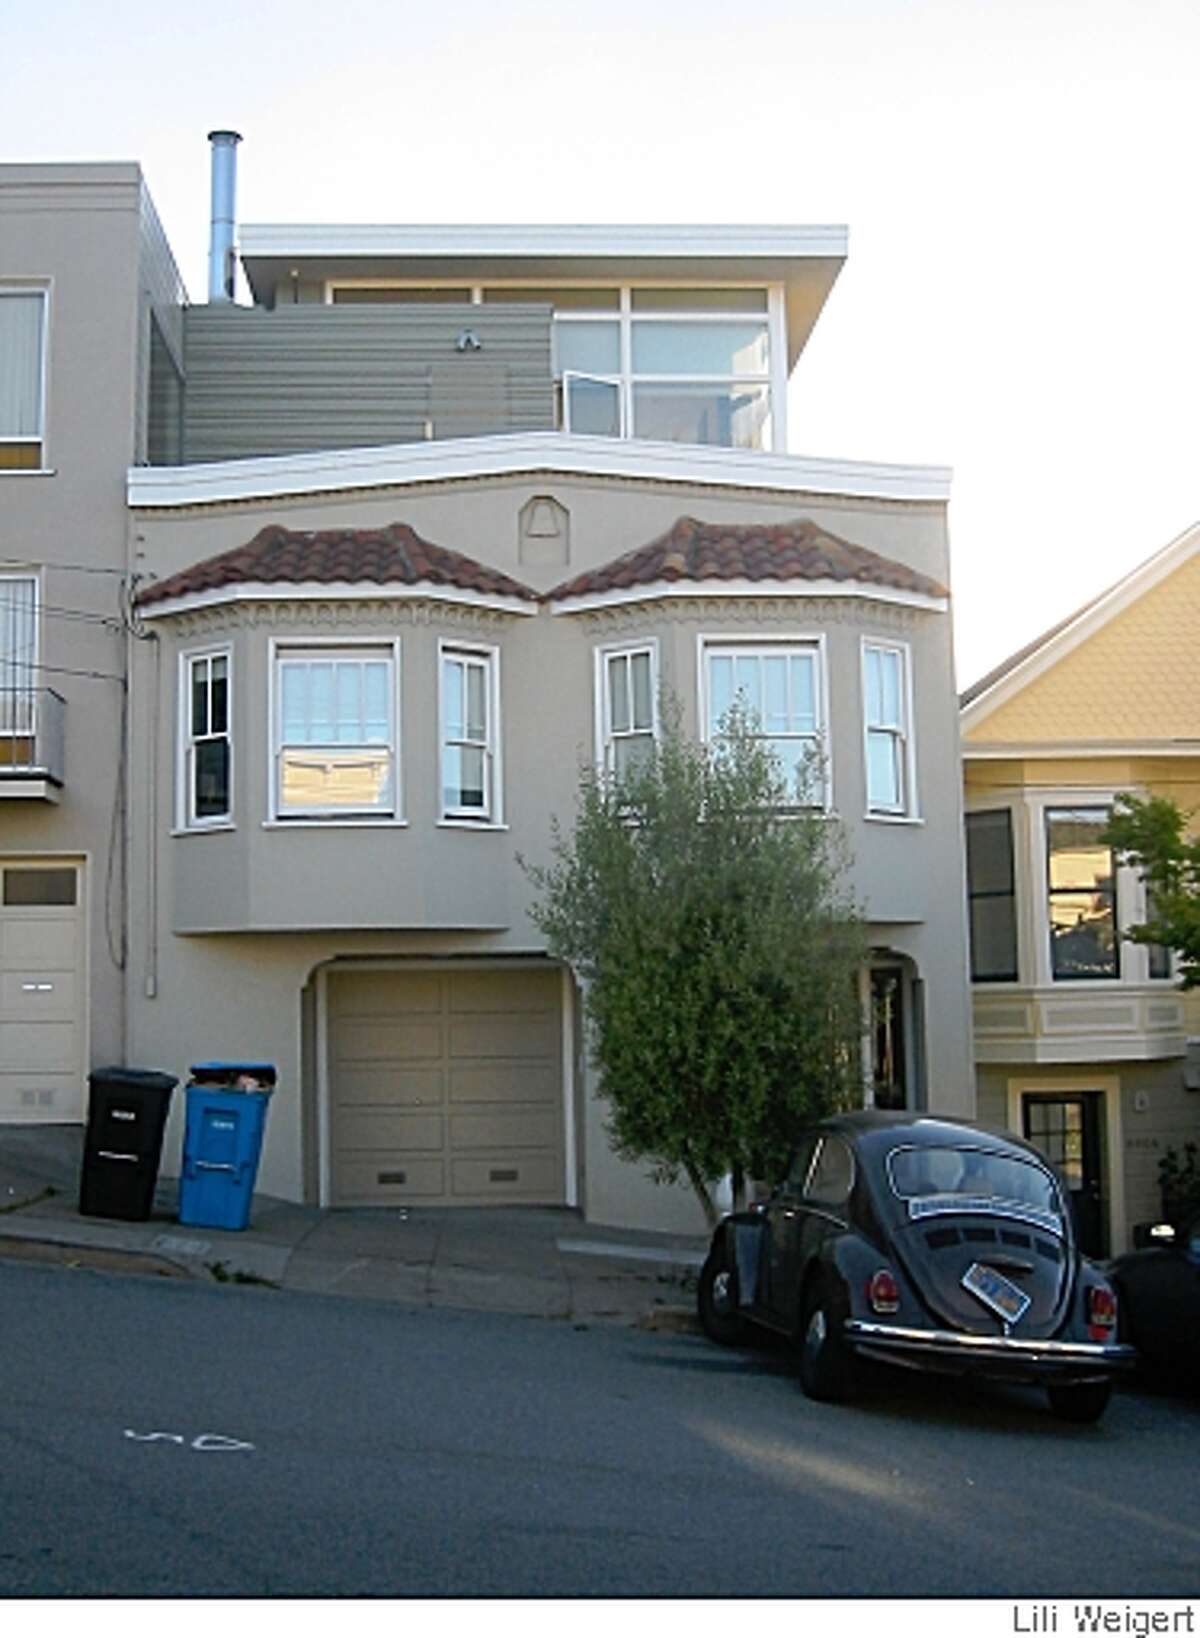 A house in the Marina District referred to in 5/25/08 Real Estate story by Lili Weigert as the Jetson House. It shows how incongruous plans can sometimes get city approval.